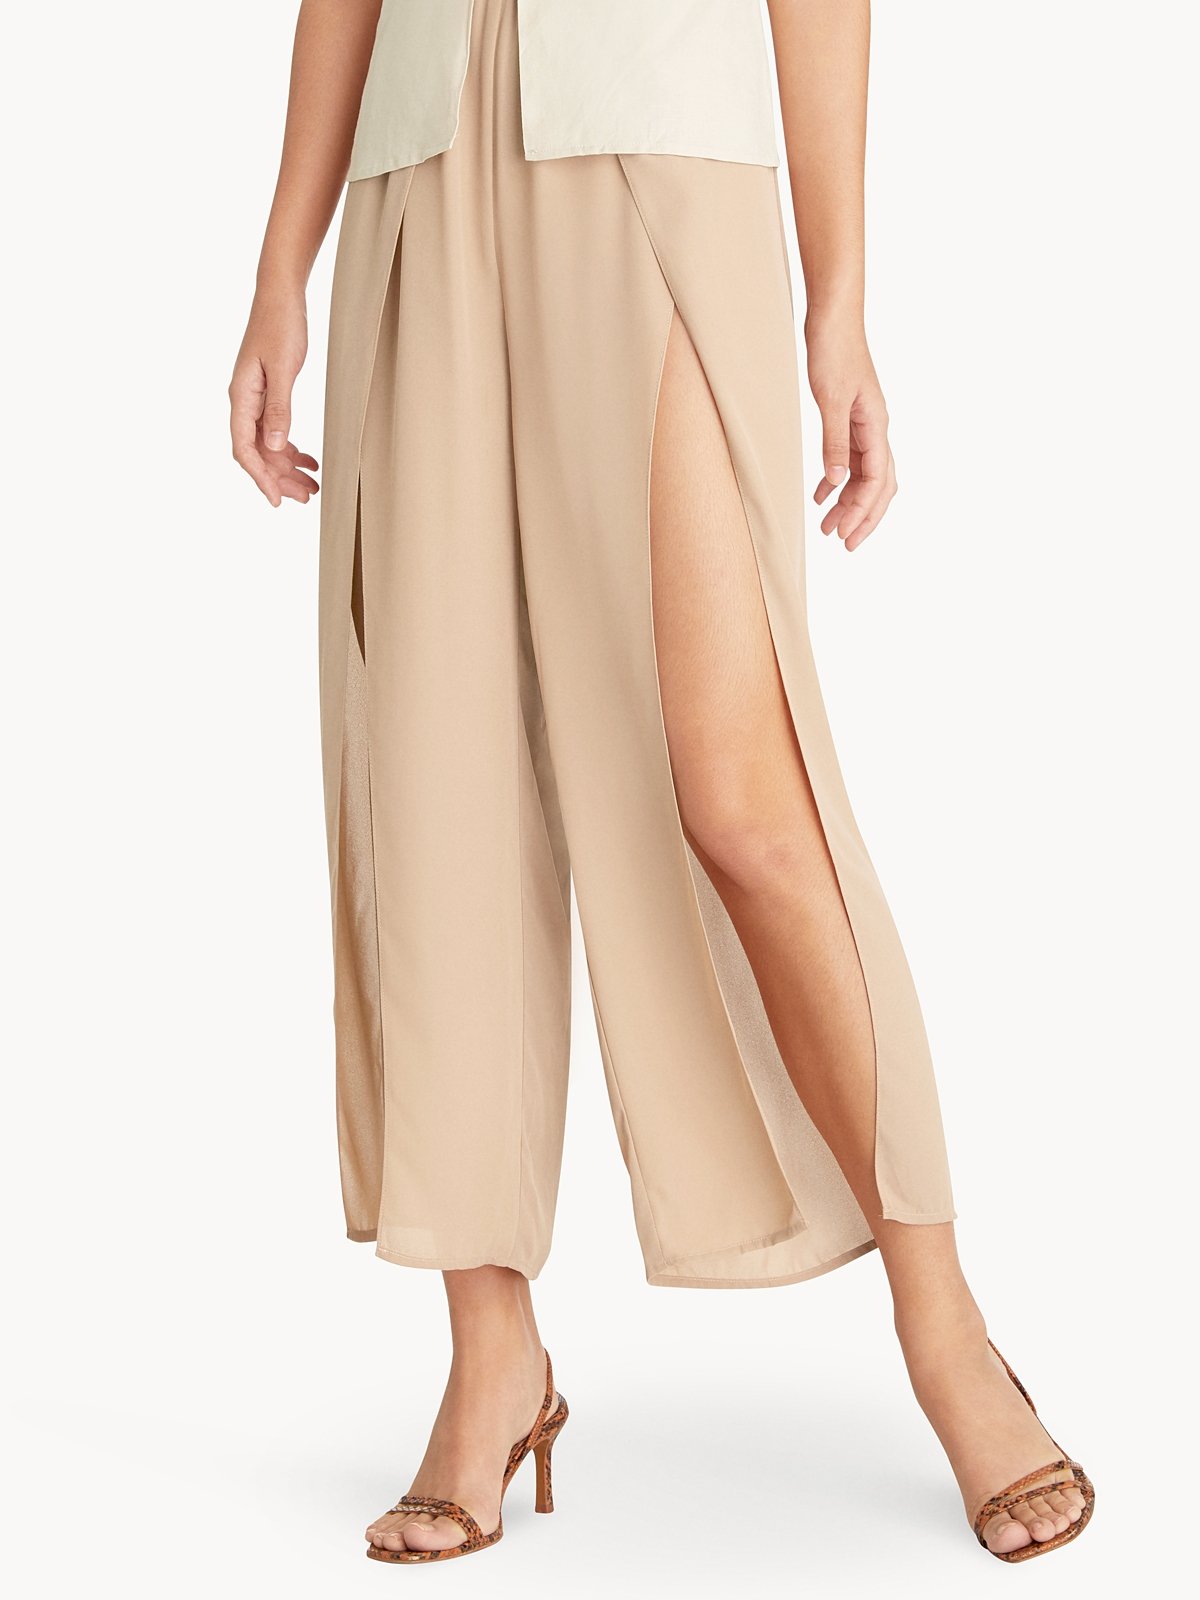 Beige Wide Leg Pants with Slit Detail Online Shopping